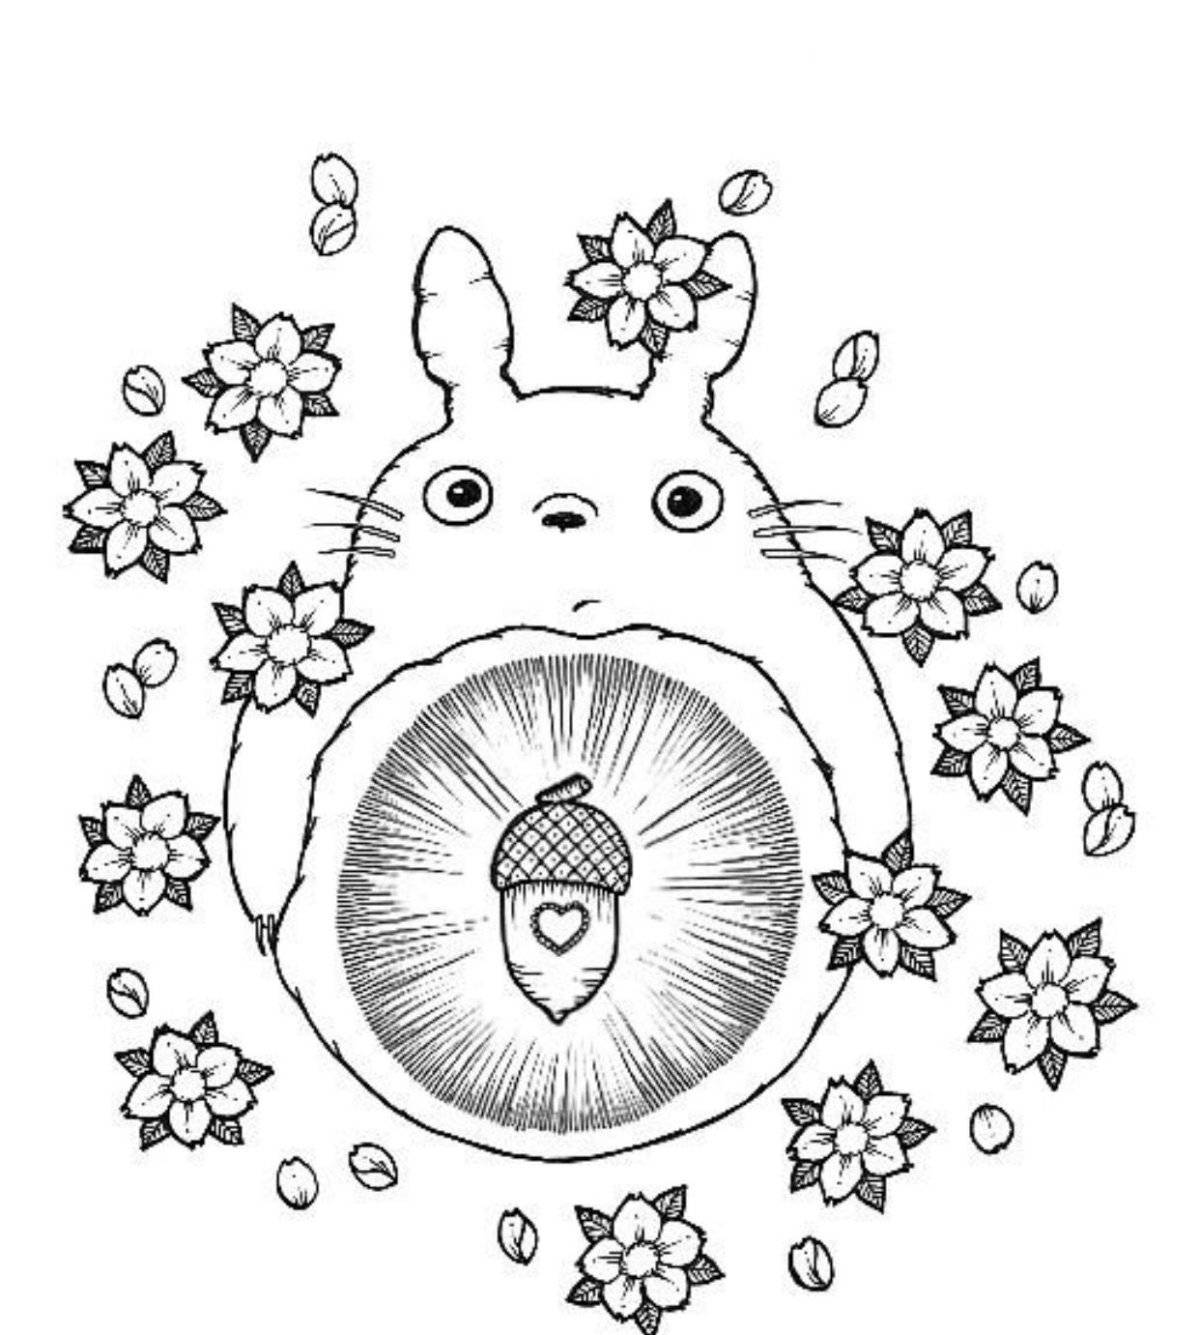 Colorful totoro coloring page